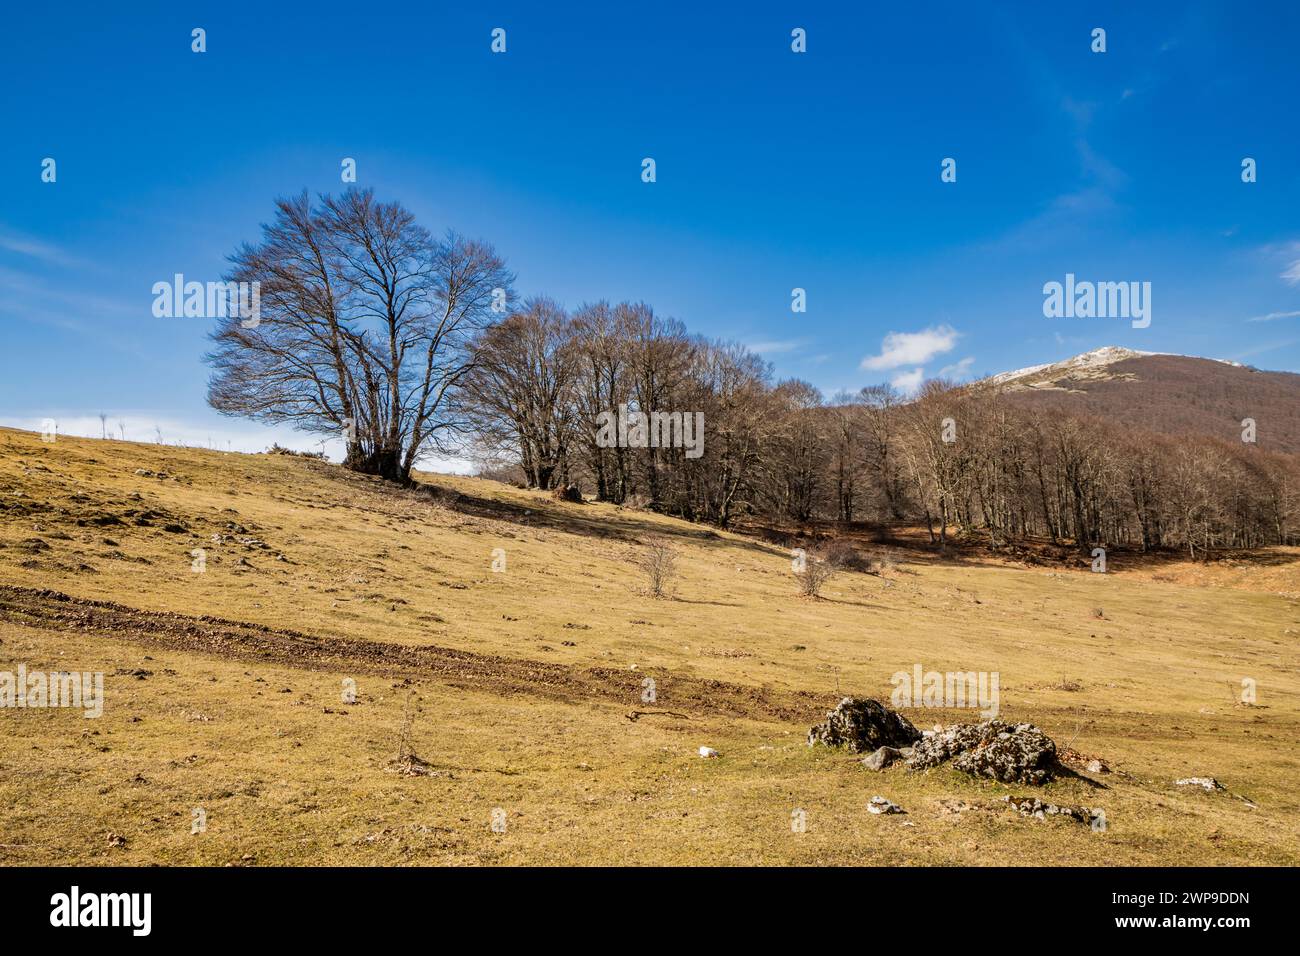 A beech forest, in Campo Felice, Italy. On the mountains of the Abruzzo Apennines. The bare trees in winter, the clear blue sky, the grassy hills, bus Stock Photo